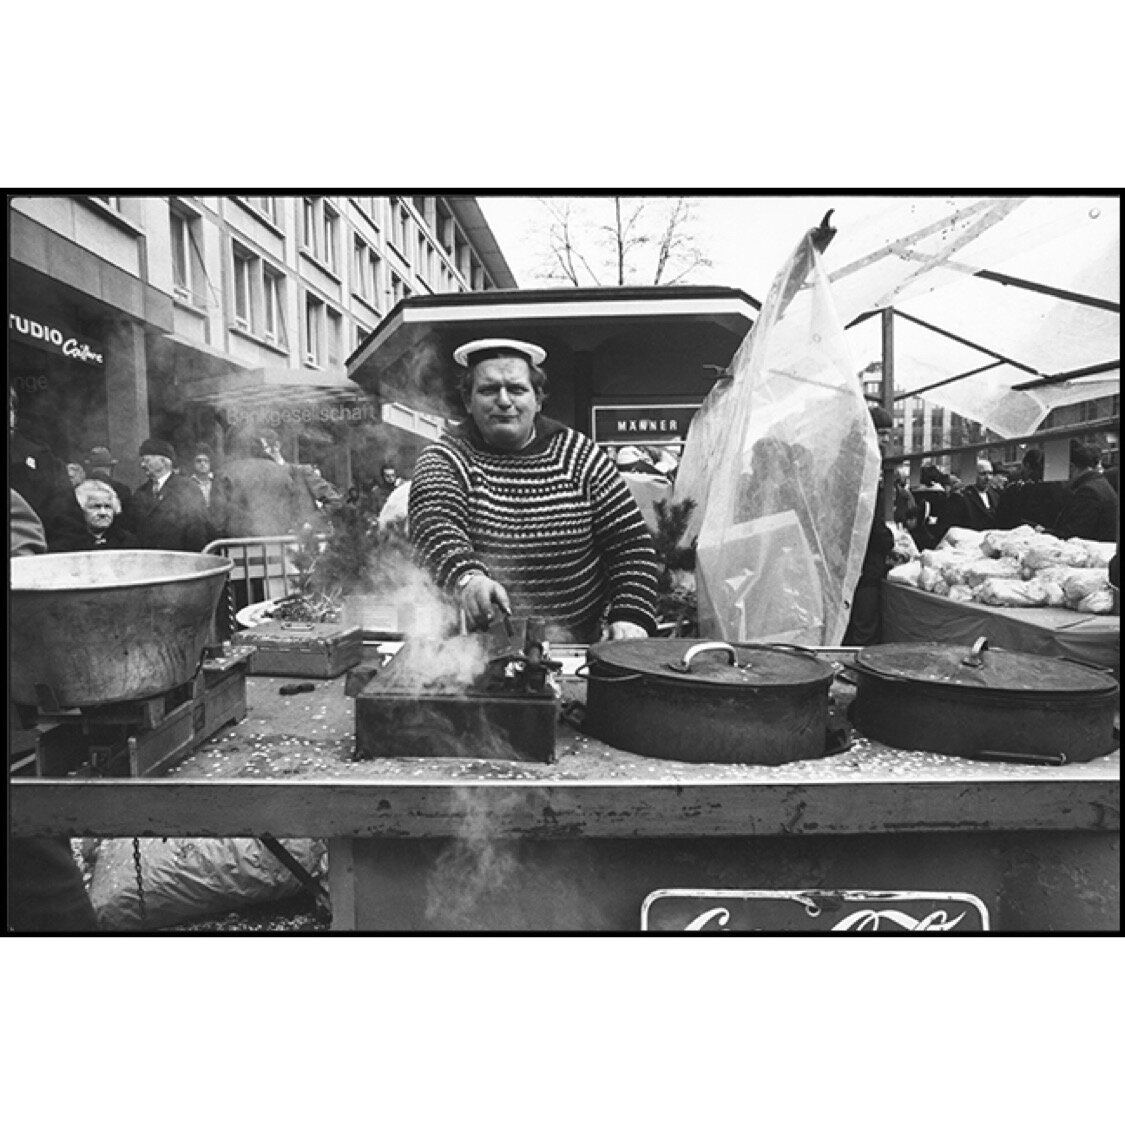 'The Best Of The Wurst' 1974 © Ave Pildas